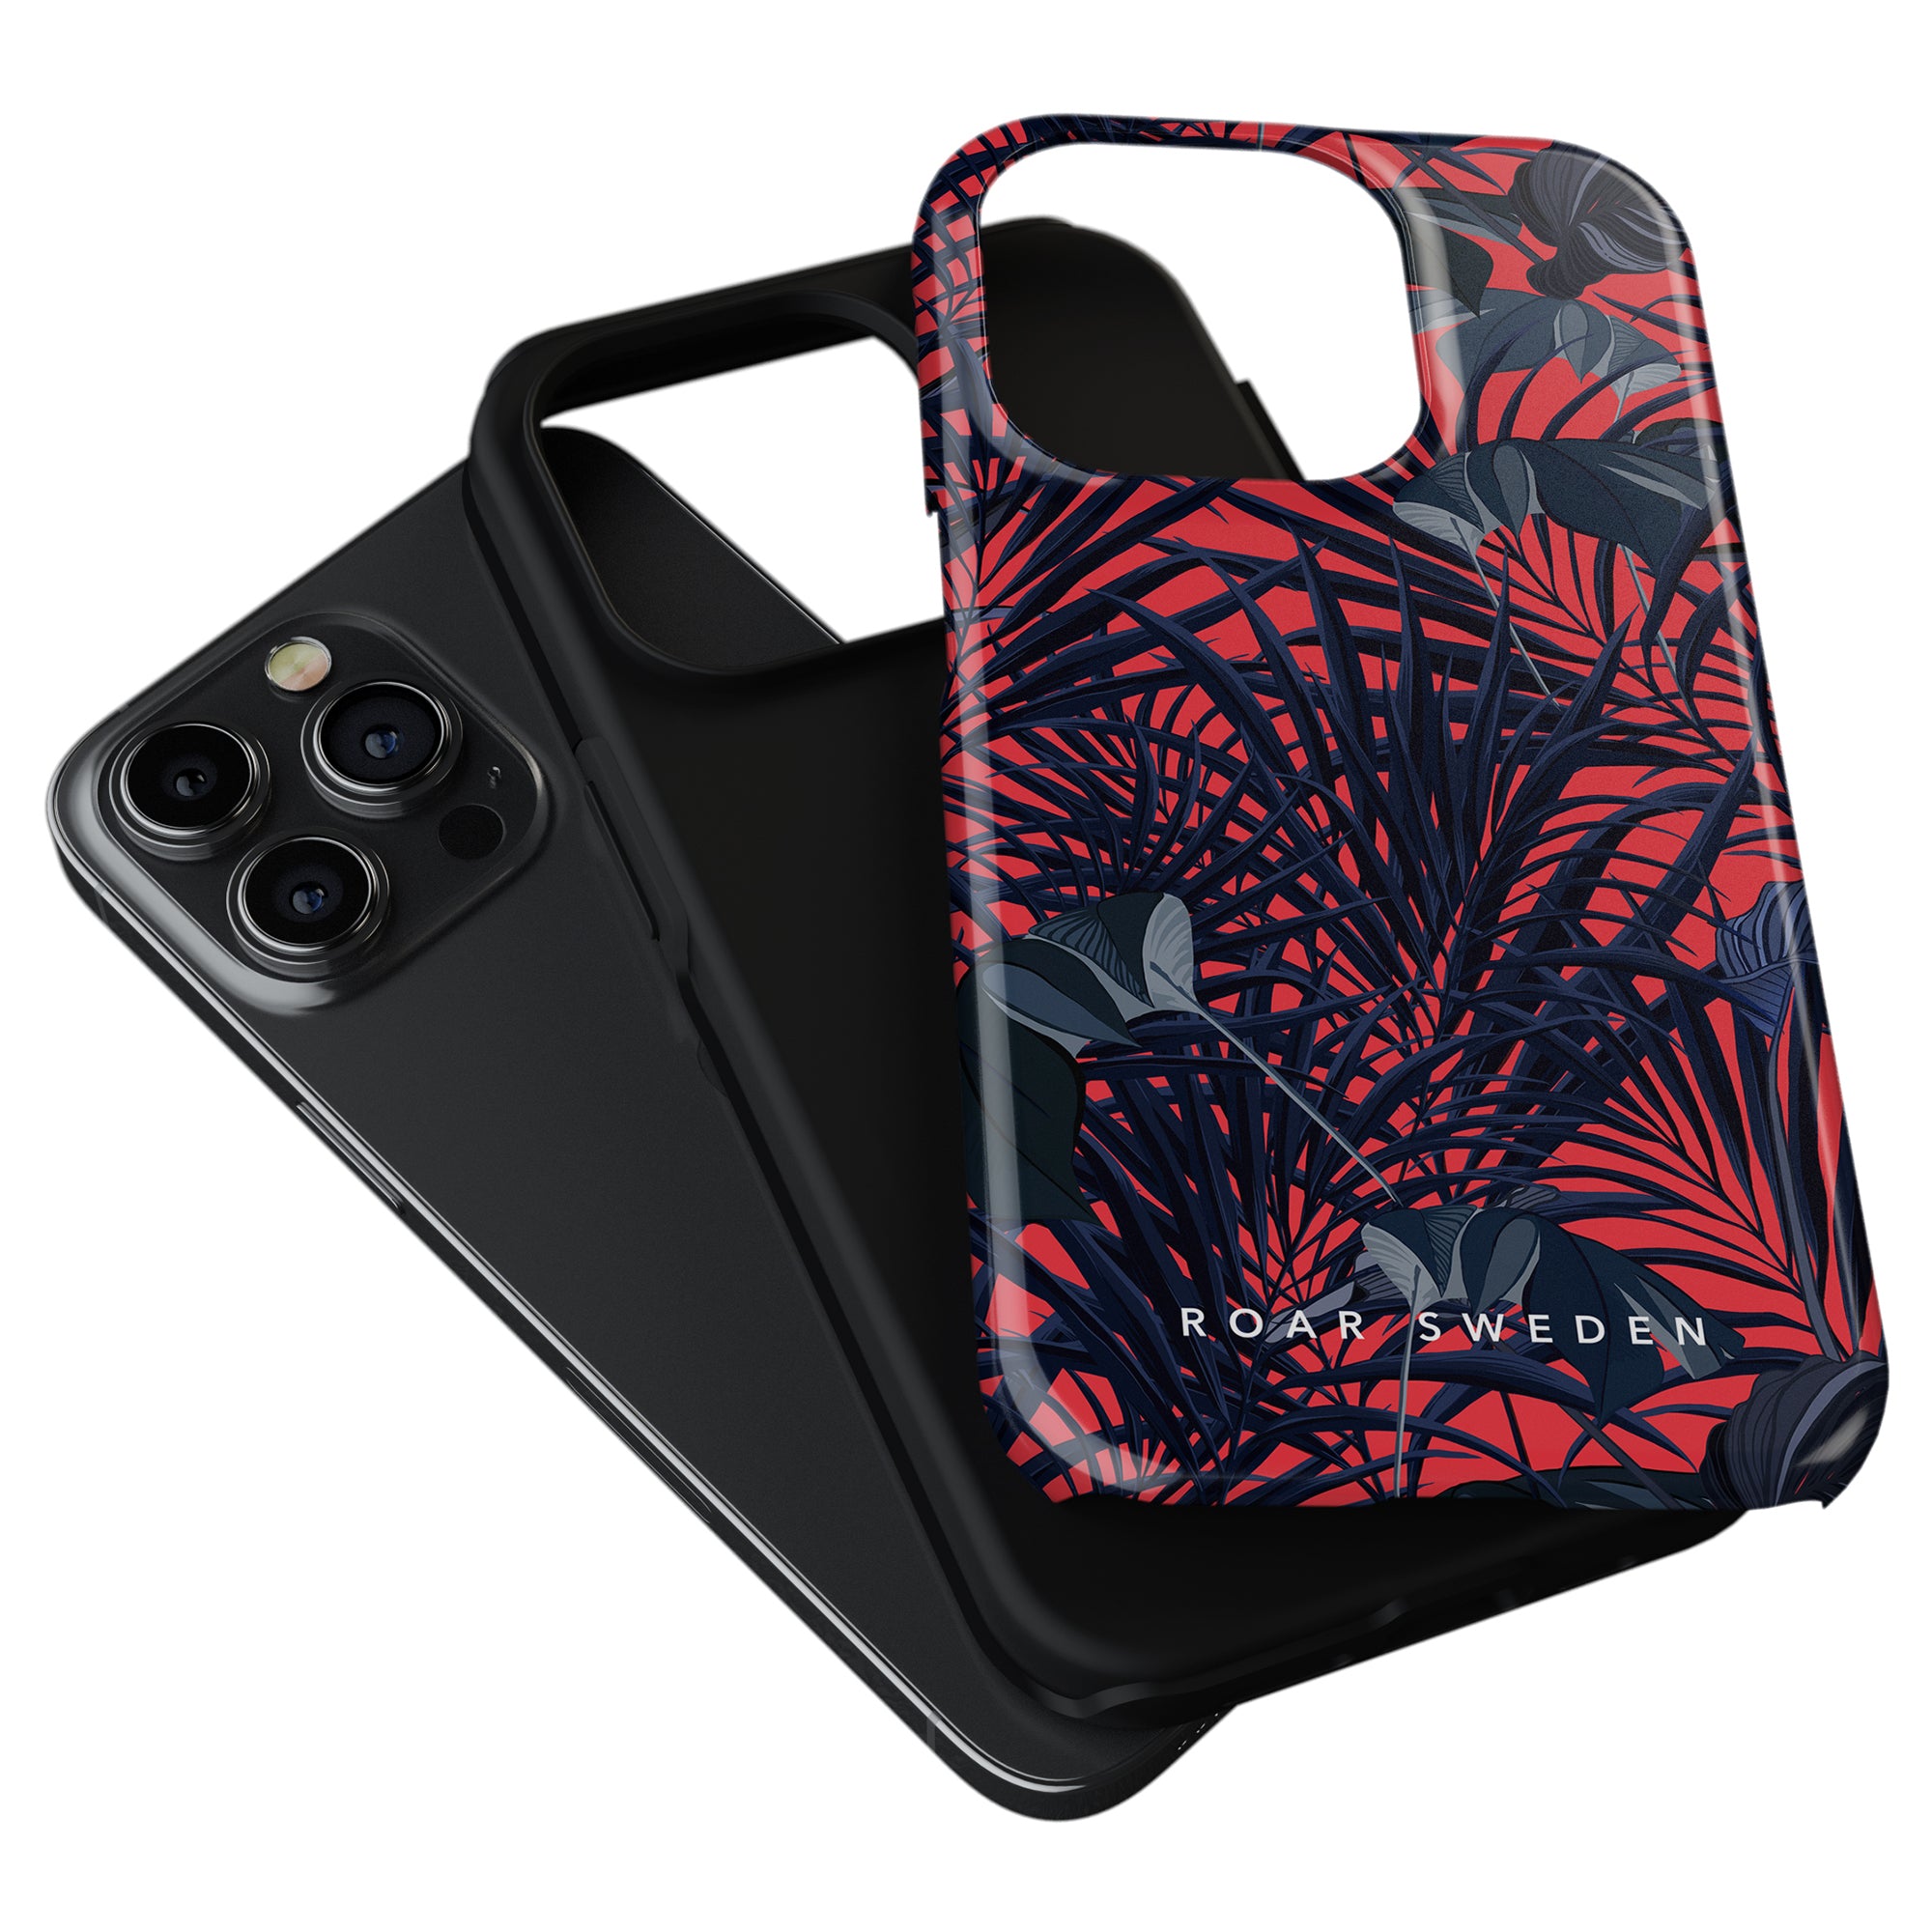 Two smartphone cases, one plain black and one from the Jungle Collection with a red and blue floral pattern labeled "Red Tropics - Tough Case," lie on top of a smartphone.